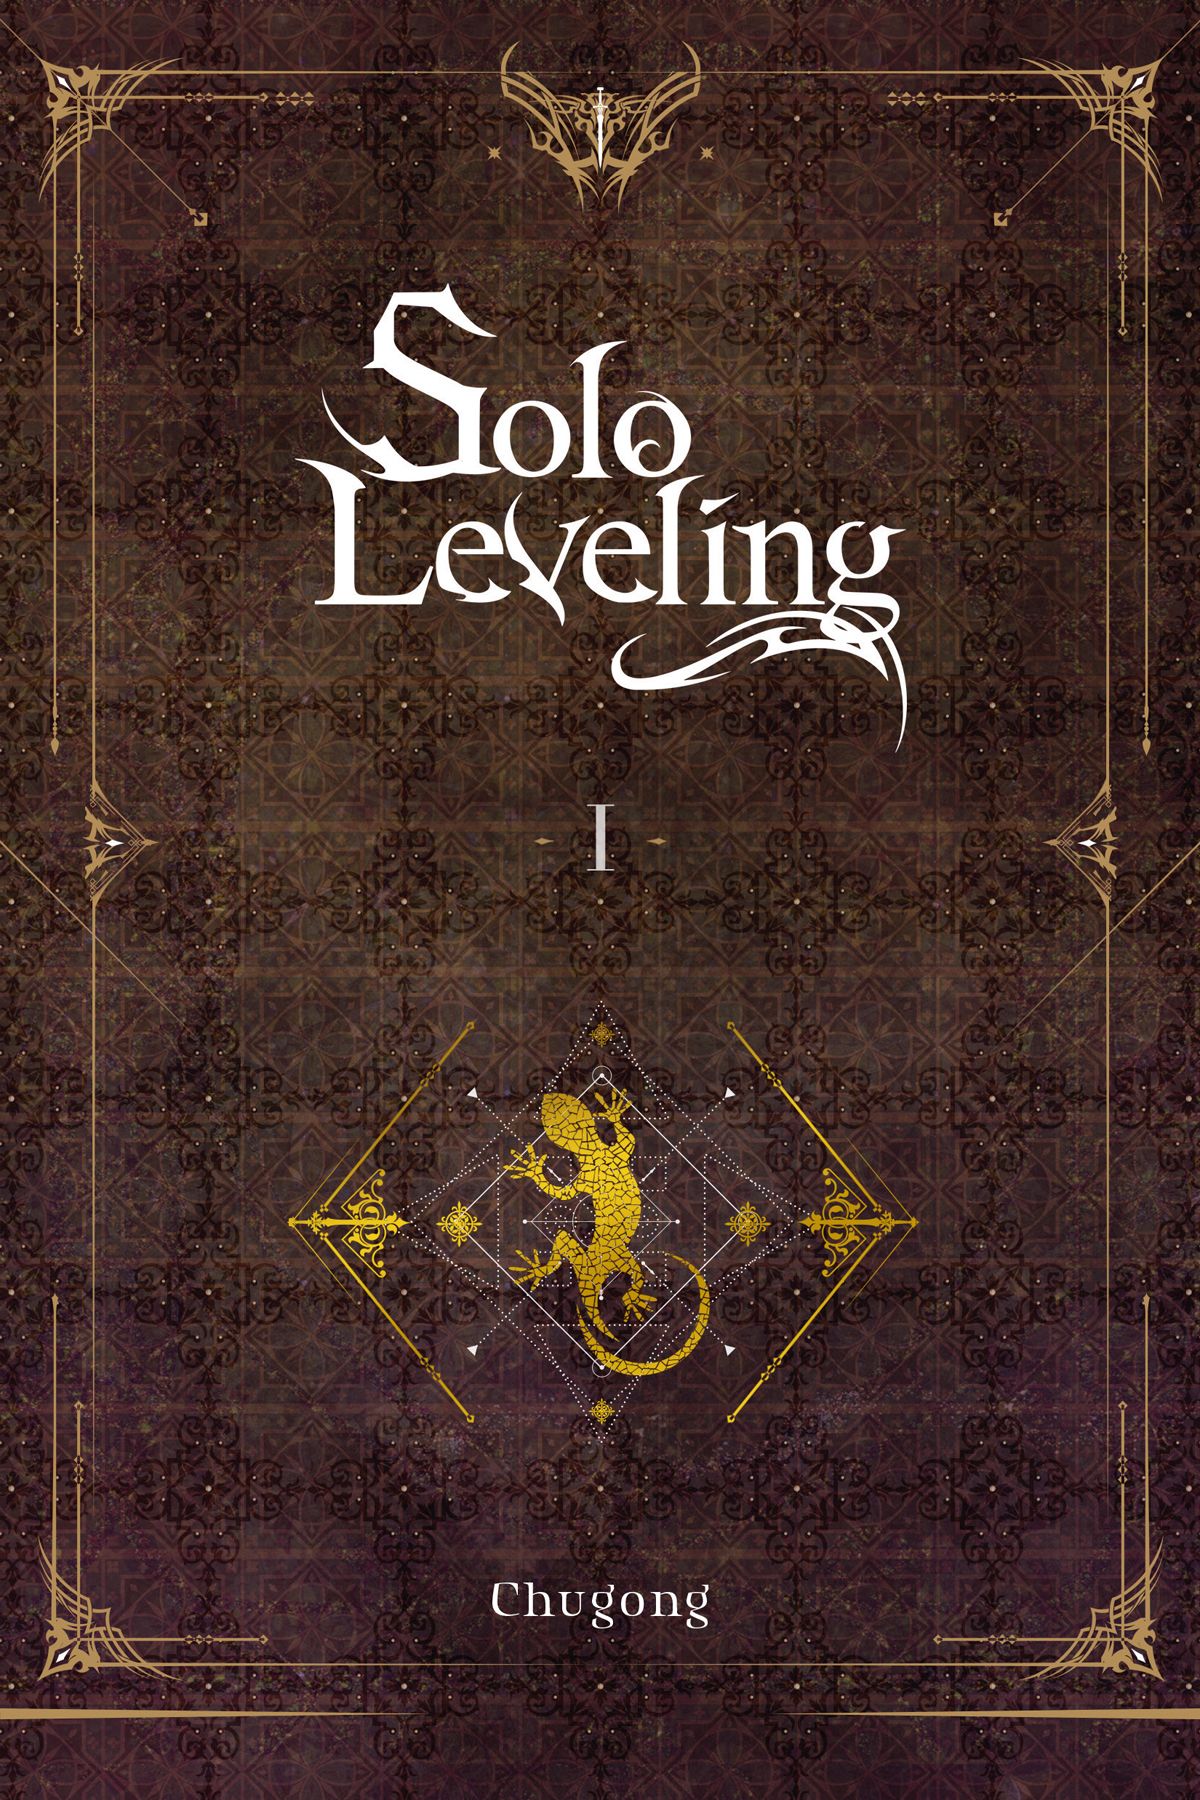 REVIEW: Solo Leveling Vol.1 Is a Thrilling Read for Both Fans